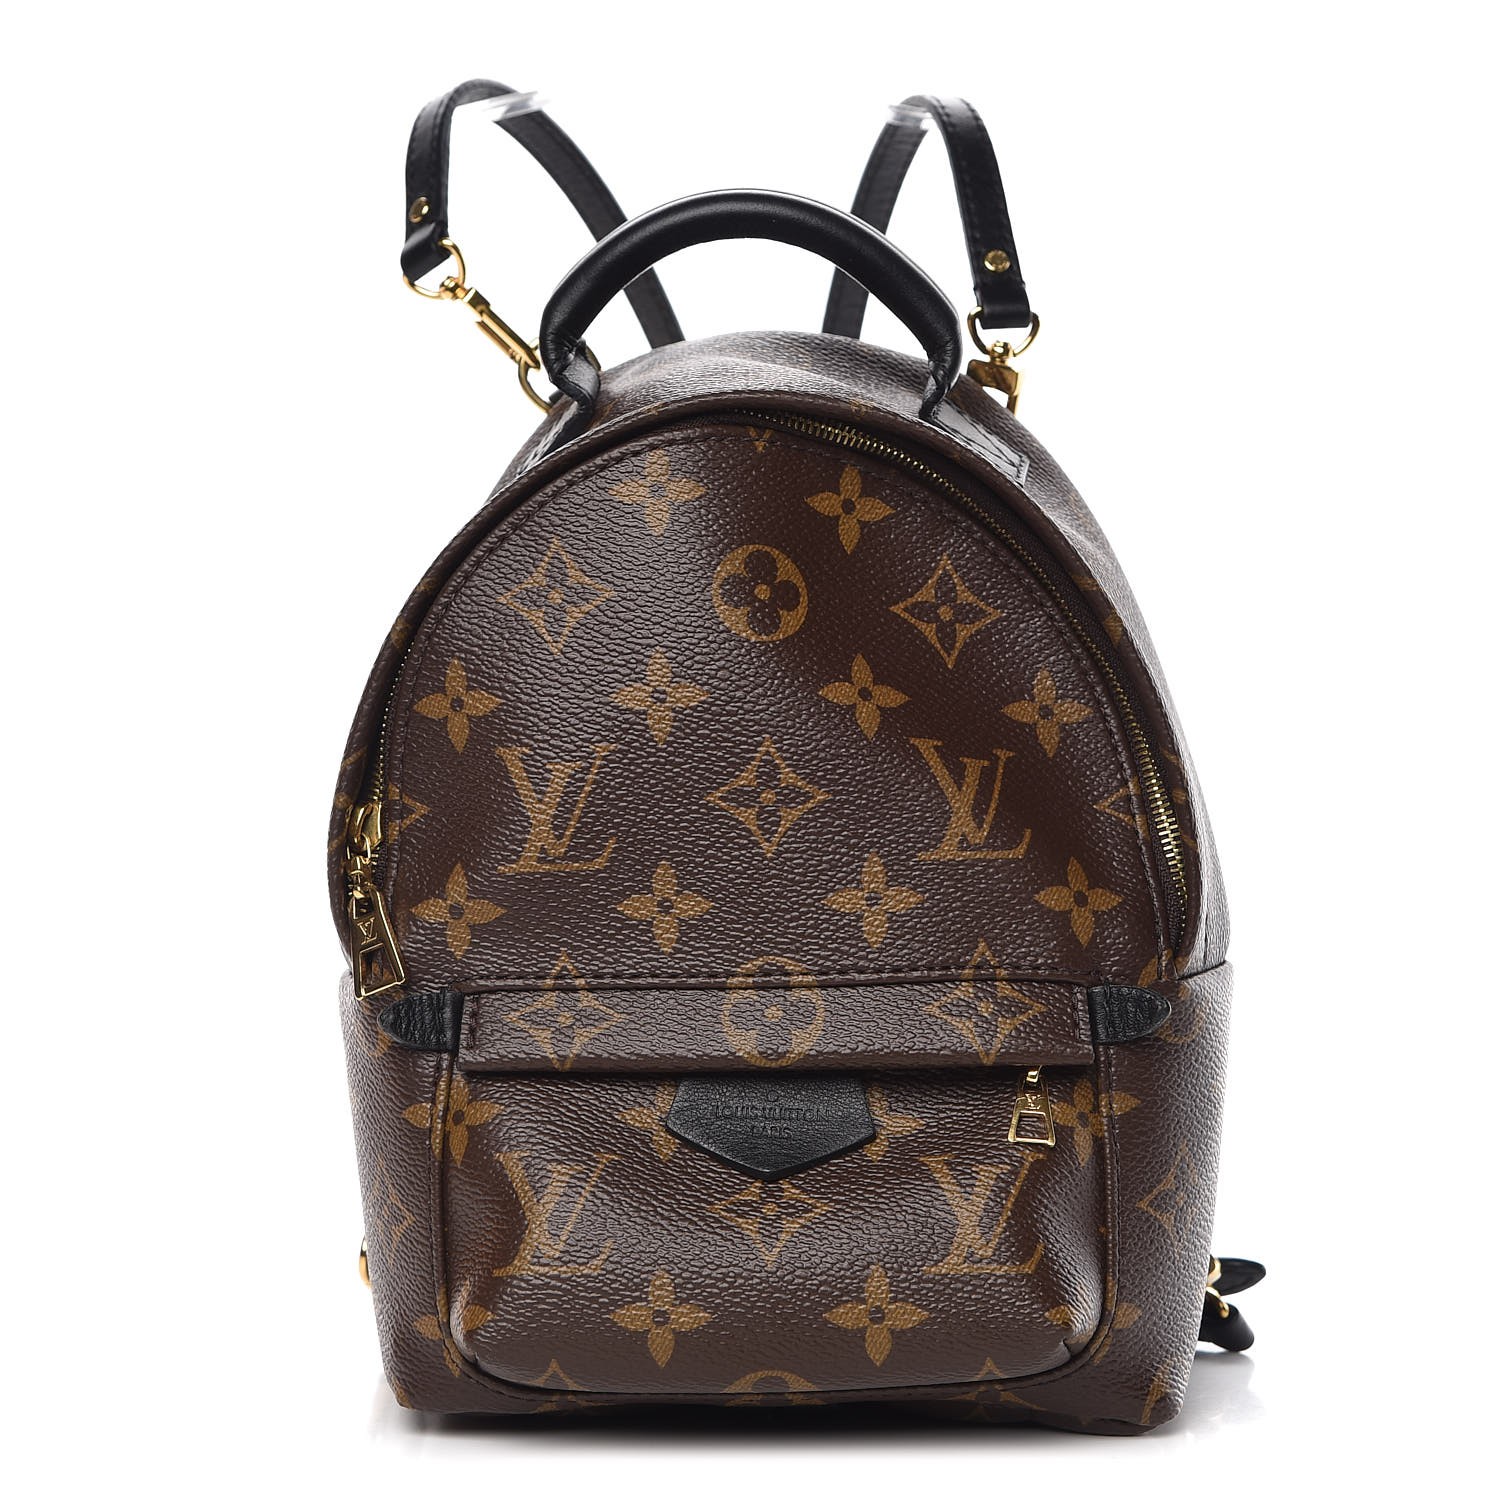 Fashionphile Louis Vuitton Backpack Women Stanford Center For Opportunity Policy In Education